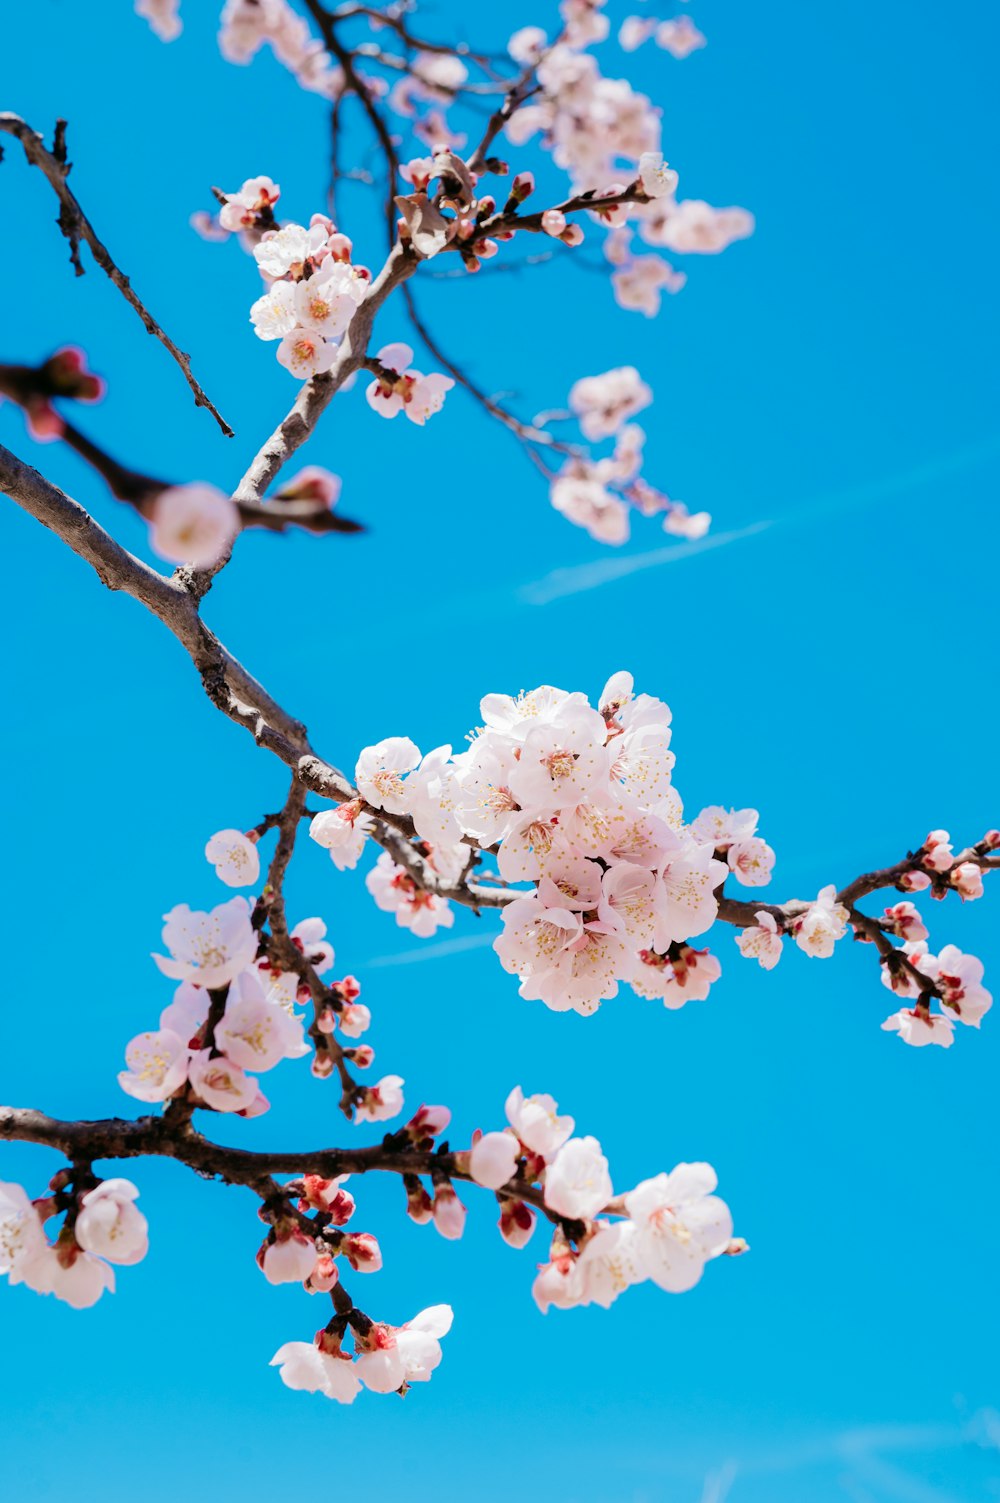 a branch of a cherry blossom tree with a blue sky in the background